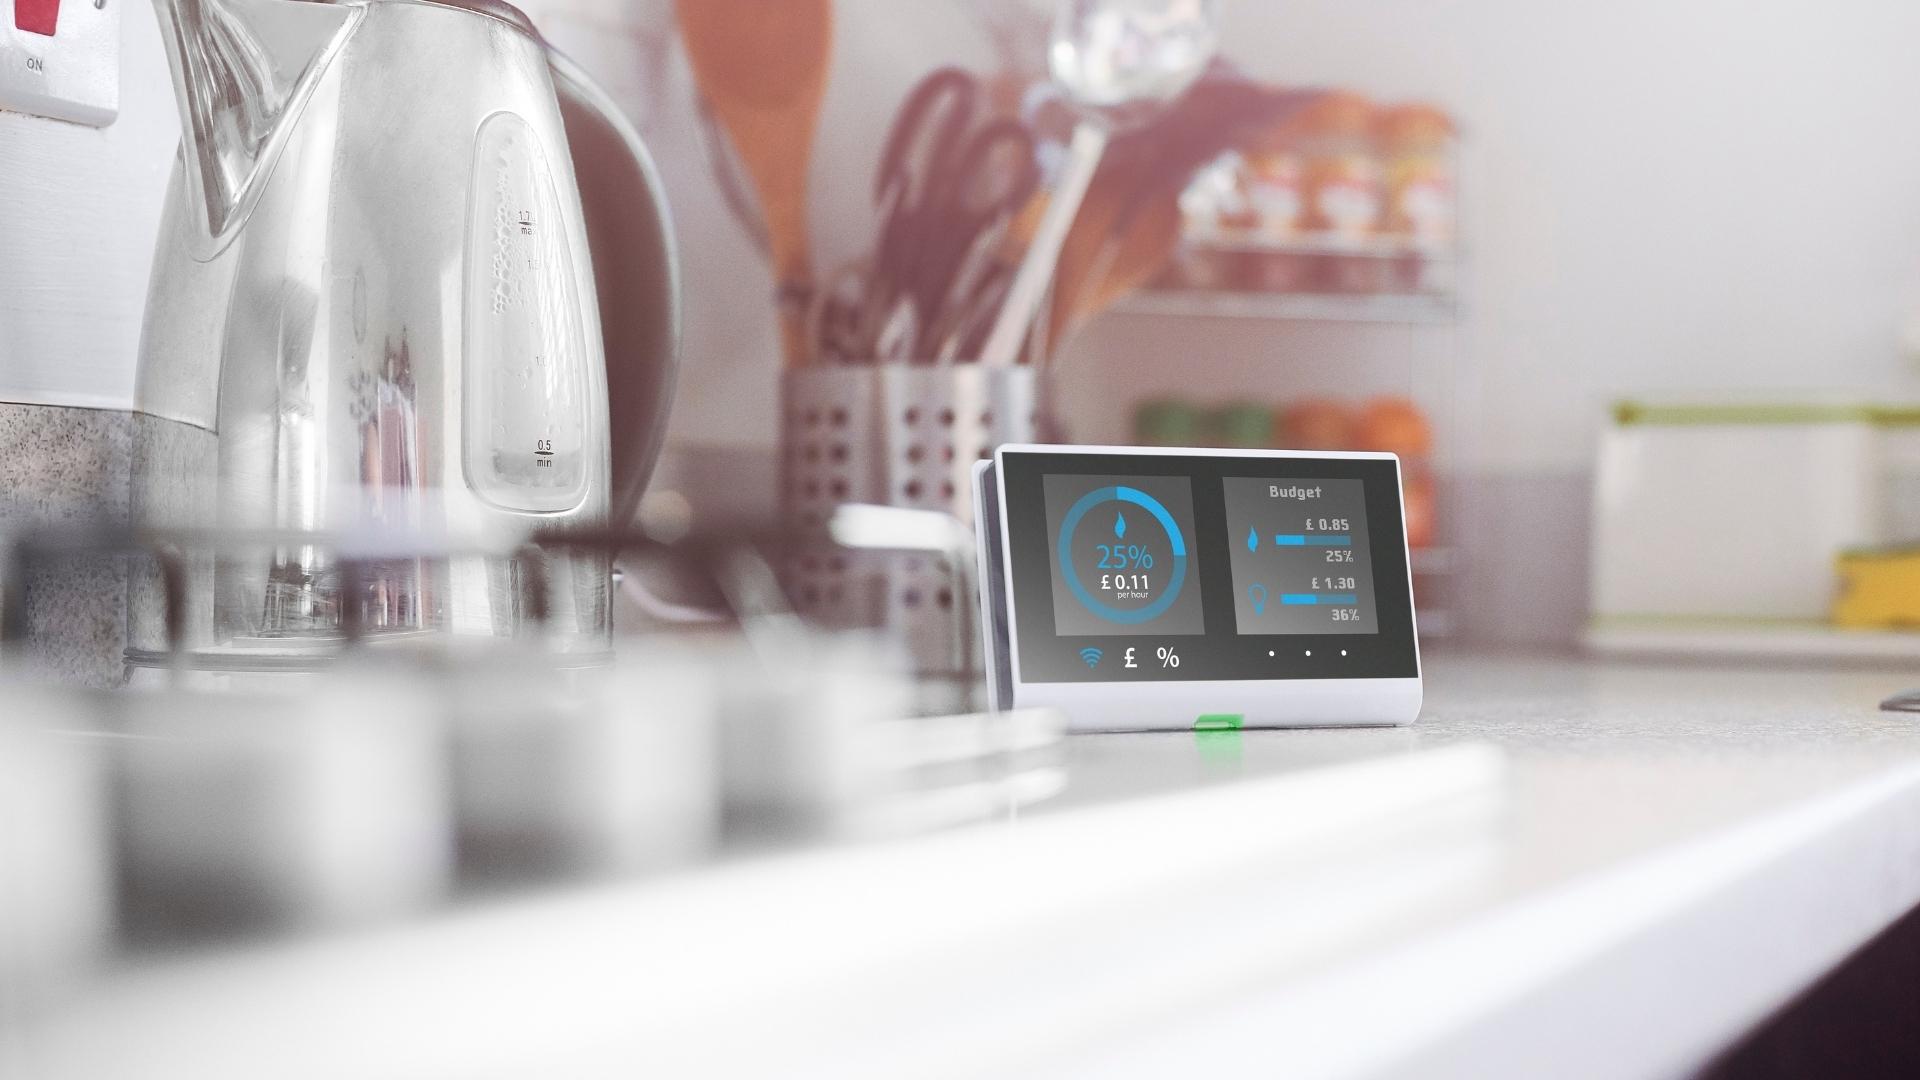 What Are The Benefits Of Upgrading To A Smart Kitchen? - RAVE Reviews